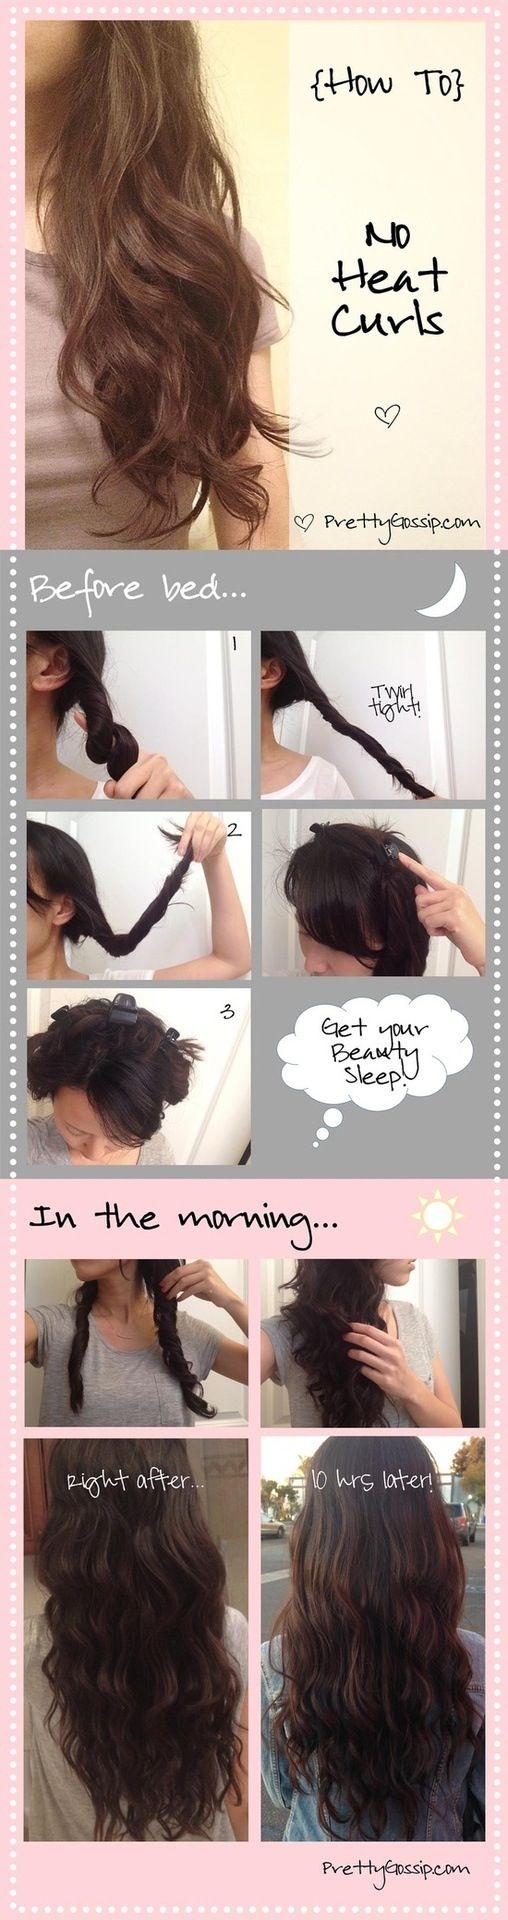 How-to-no-heat curls about